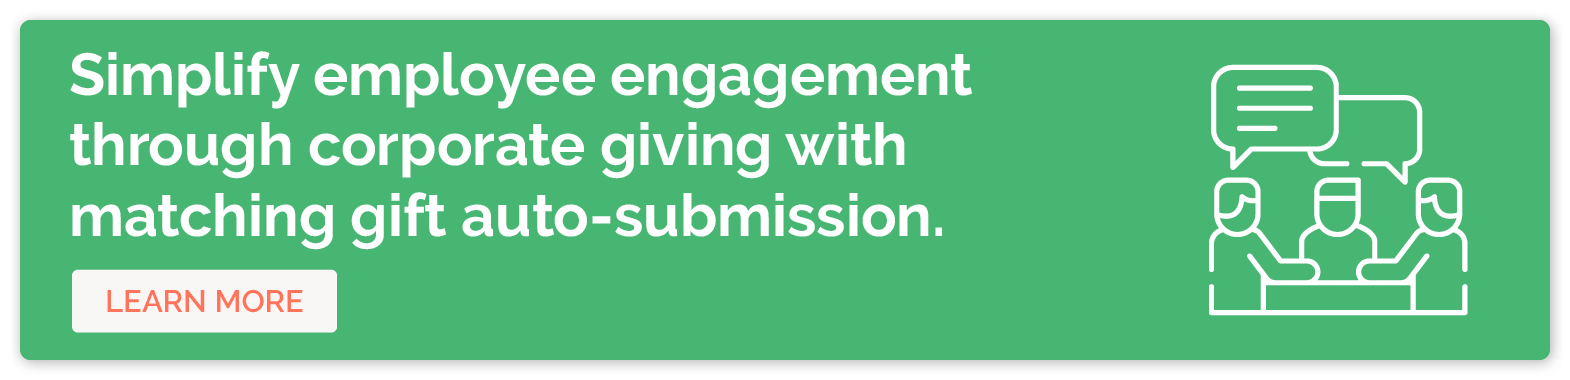 Click to learn more about matching gift auto-submission and how it helps employee engagement companies.